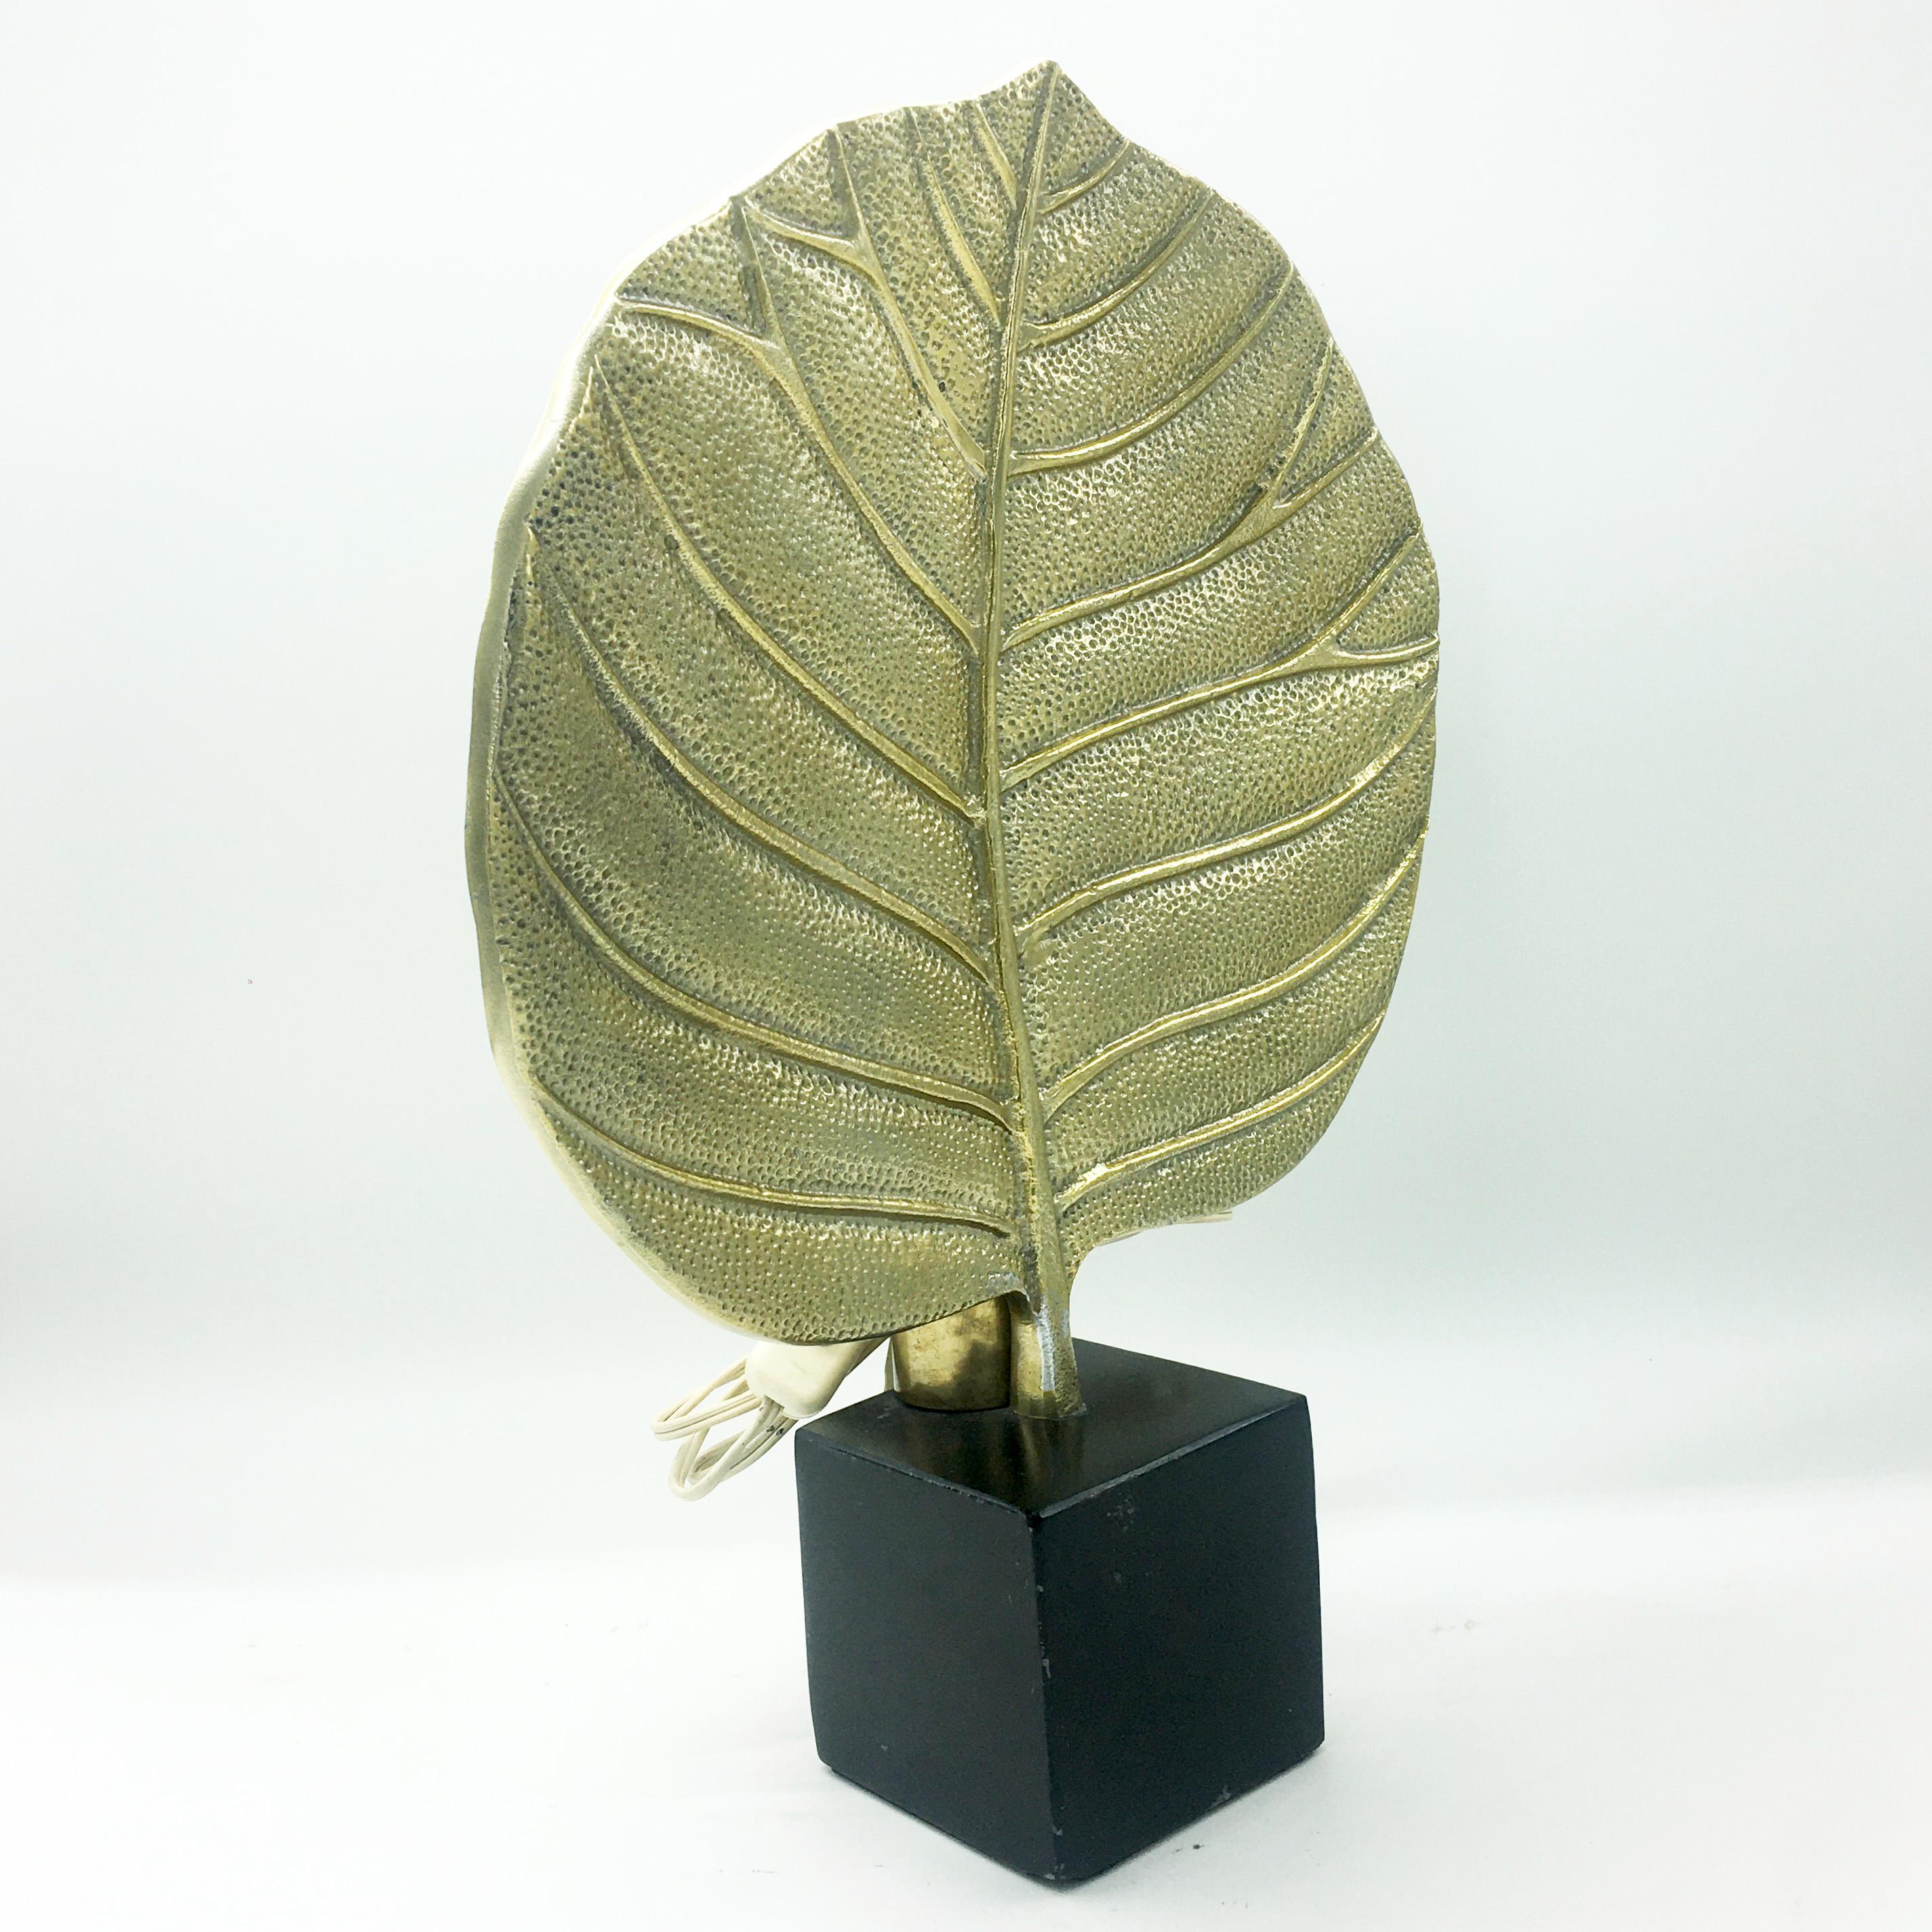 Singular table lamp made of brass in the shape of a rhubarb leaf, with black marble base.
Elegant design, it is suitable for any environment.